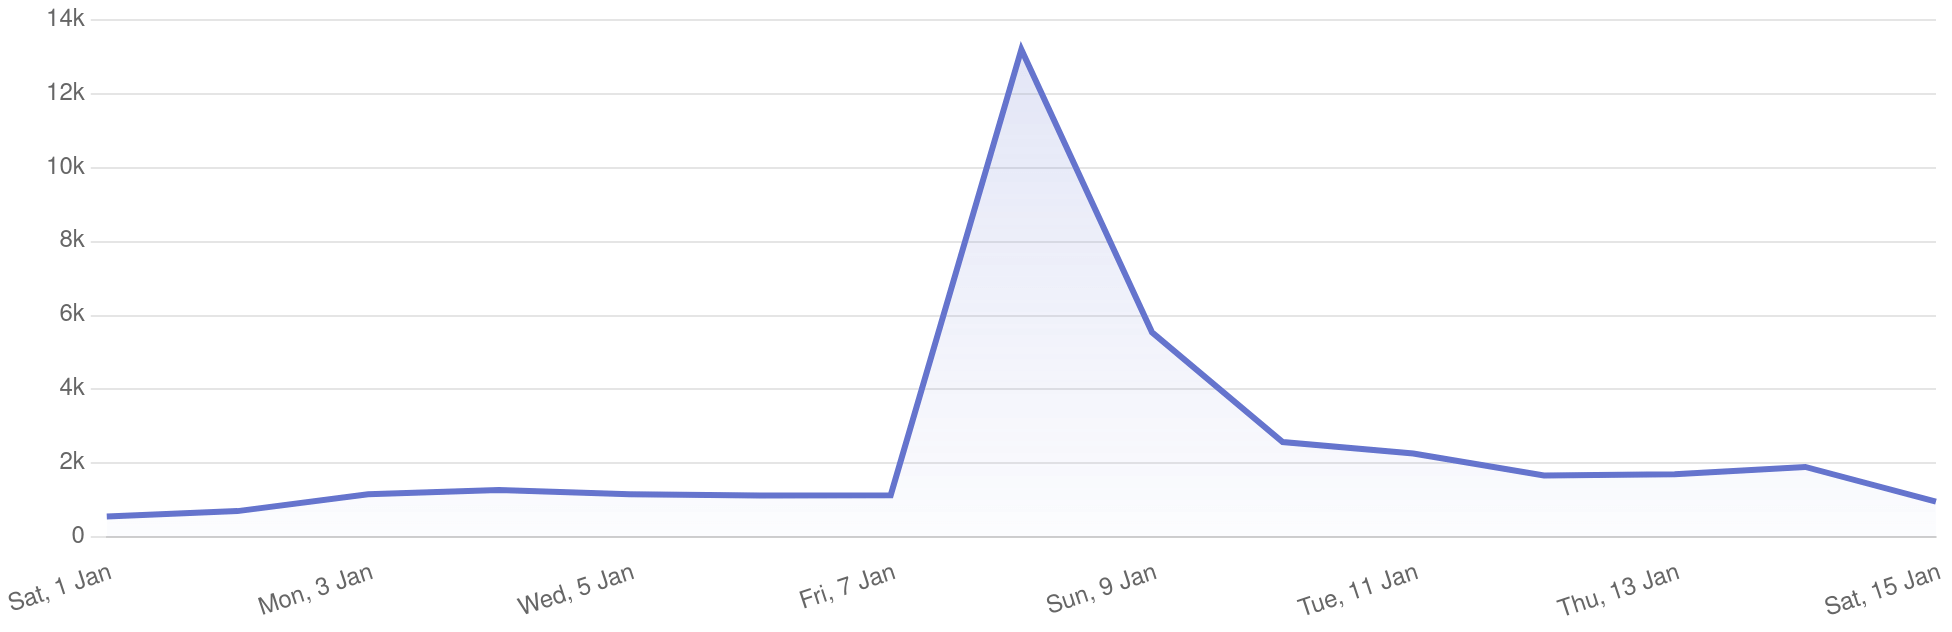 BookStack Visitor Analytics Line Chart, Showing a spike on the 8th of Jan